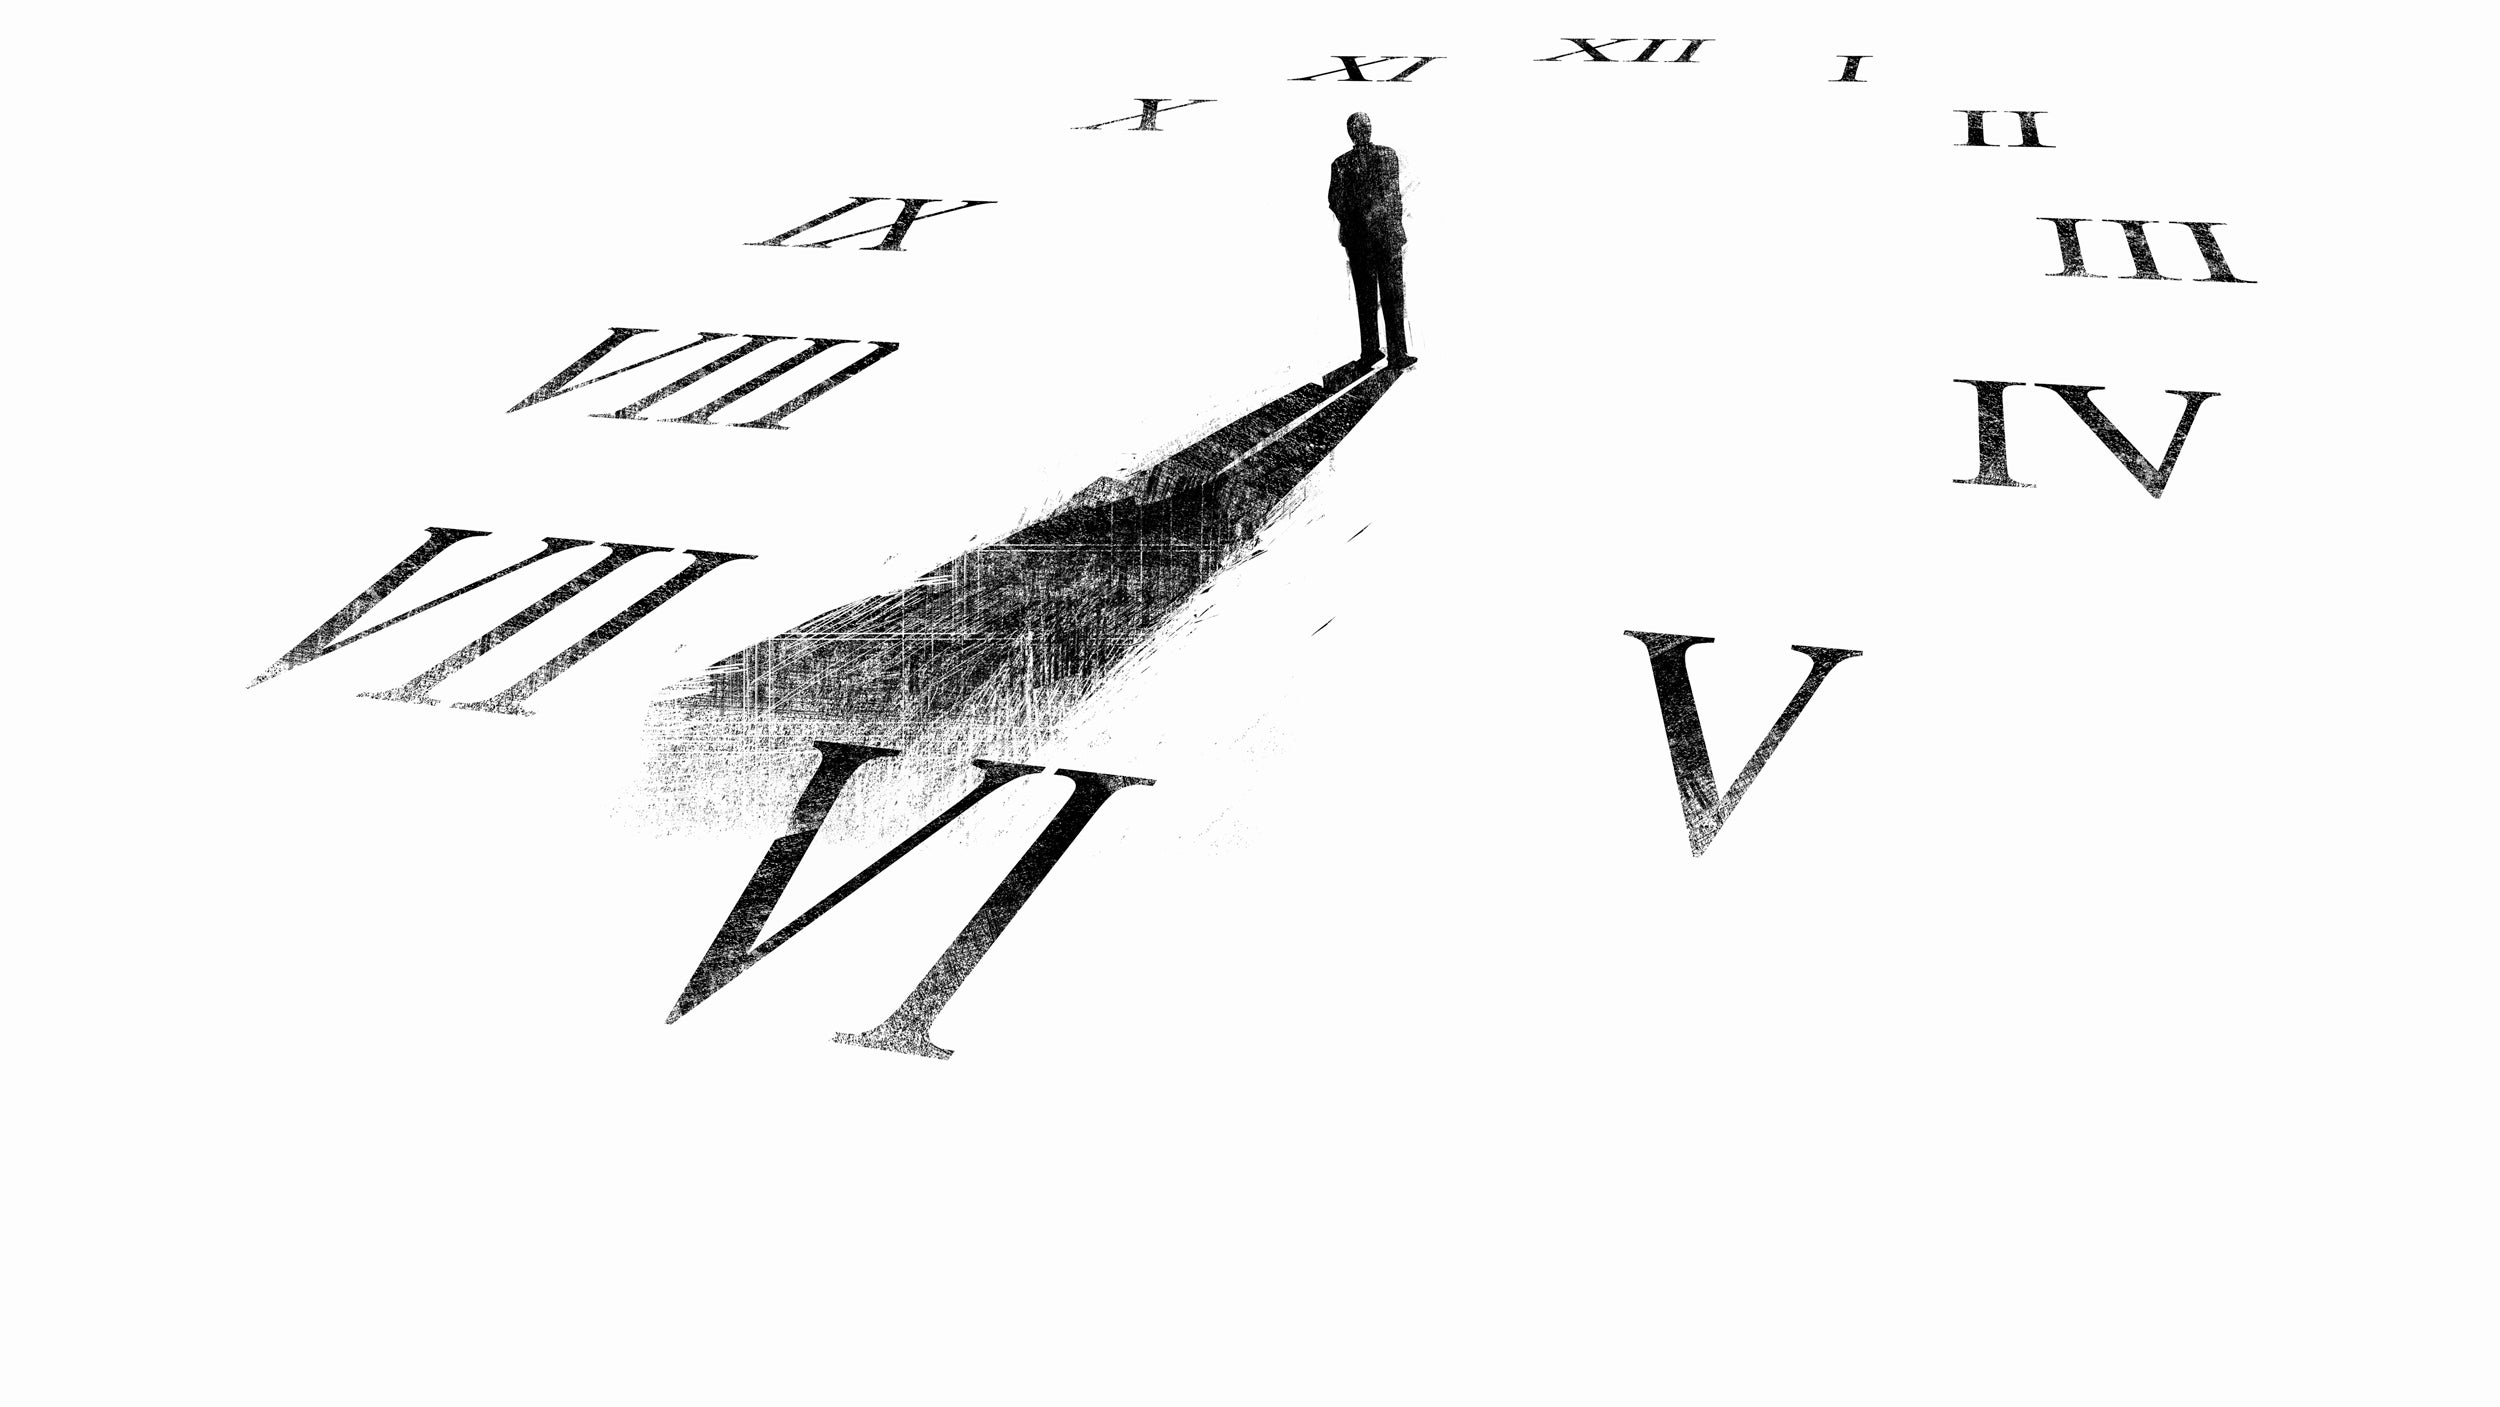 Illustration of man's shadow forming hands on a clock.